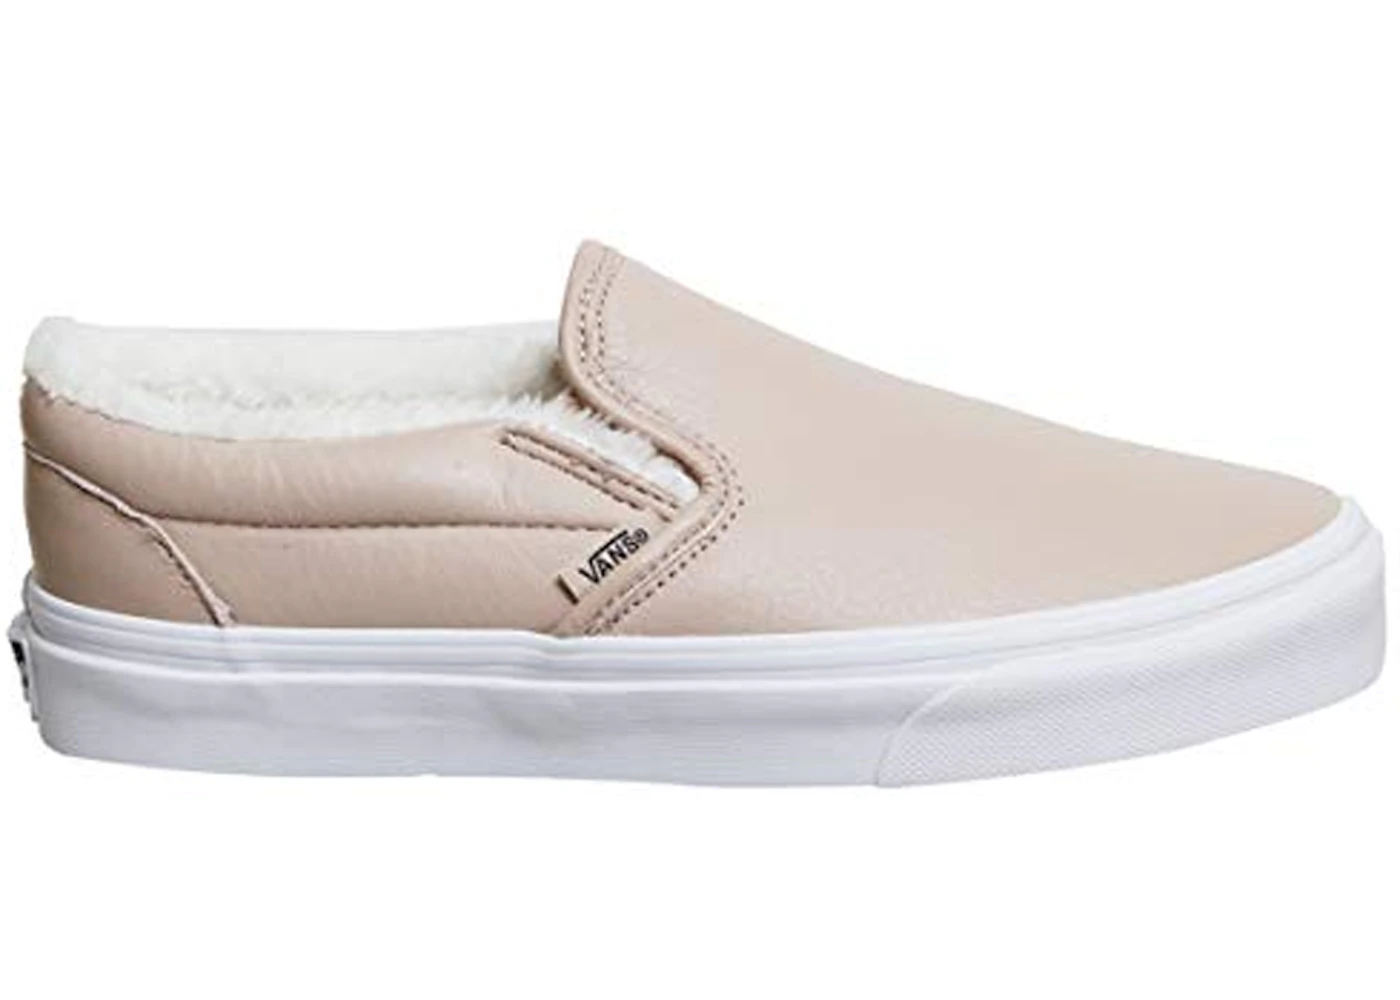 Vans Slip-On Mahogany Rose Leather (Women's) - VN0A38F7QTR - US